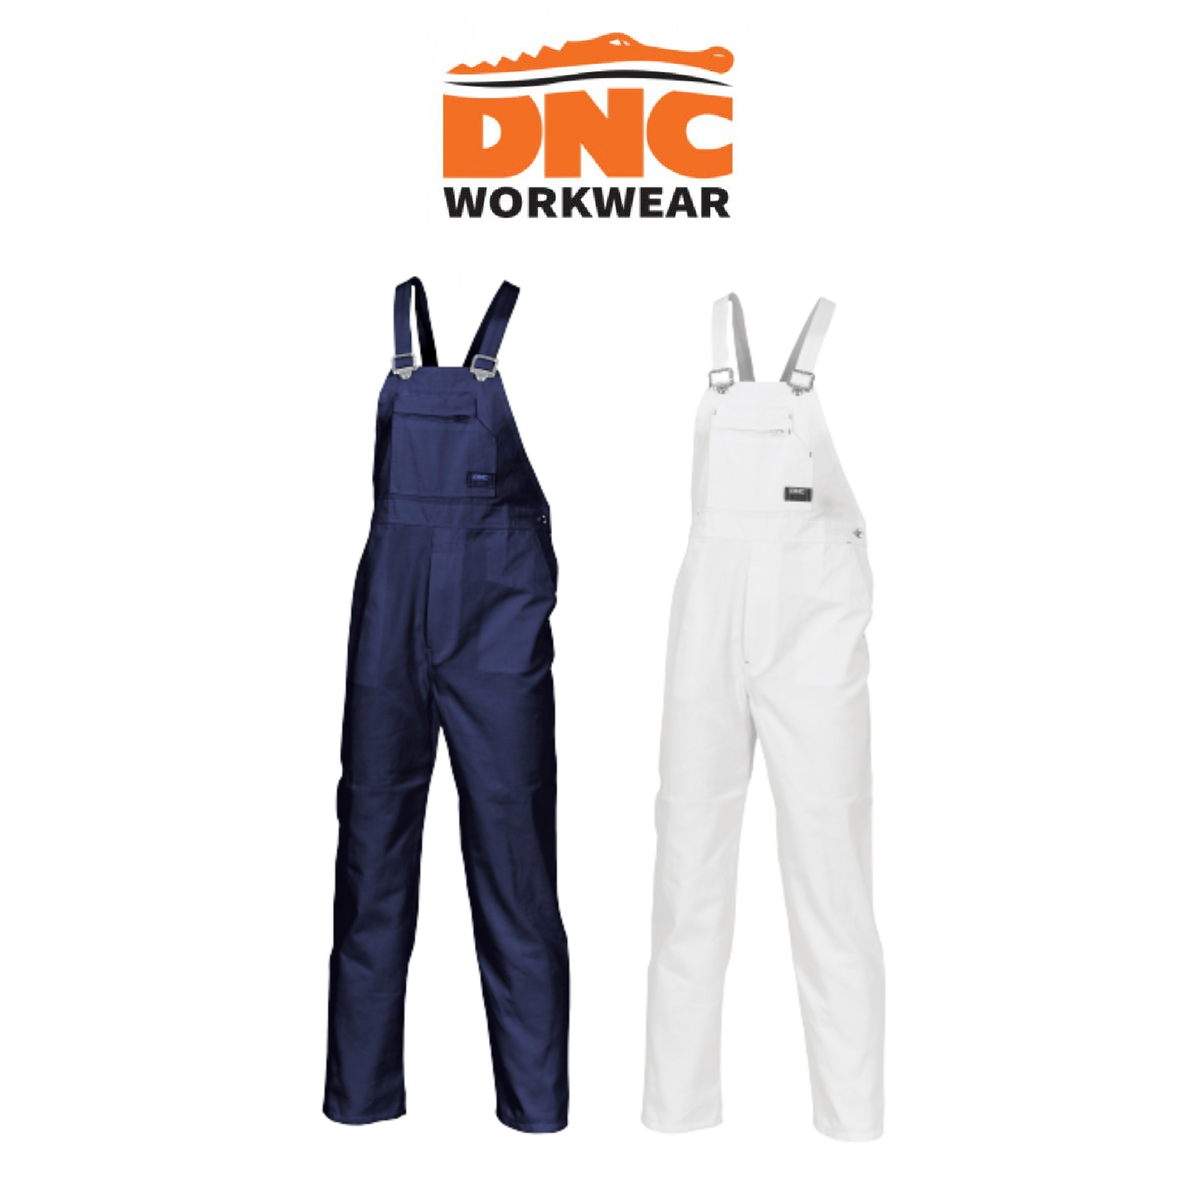 DNC Workwear Mens Cotton Drill Bib And Brace Overall Comfortable  Work 3111